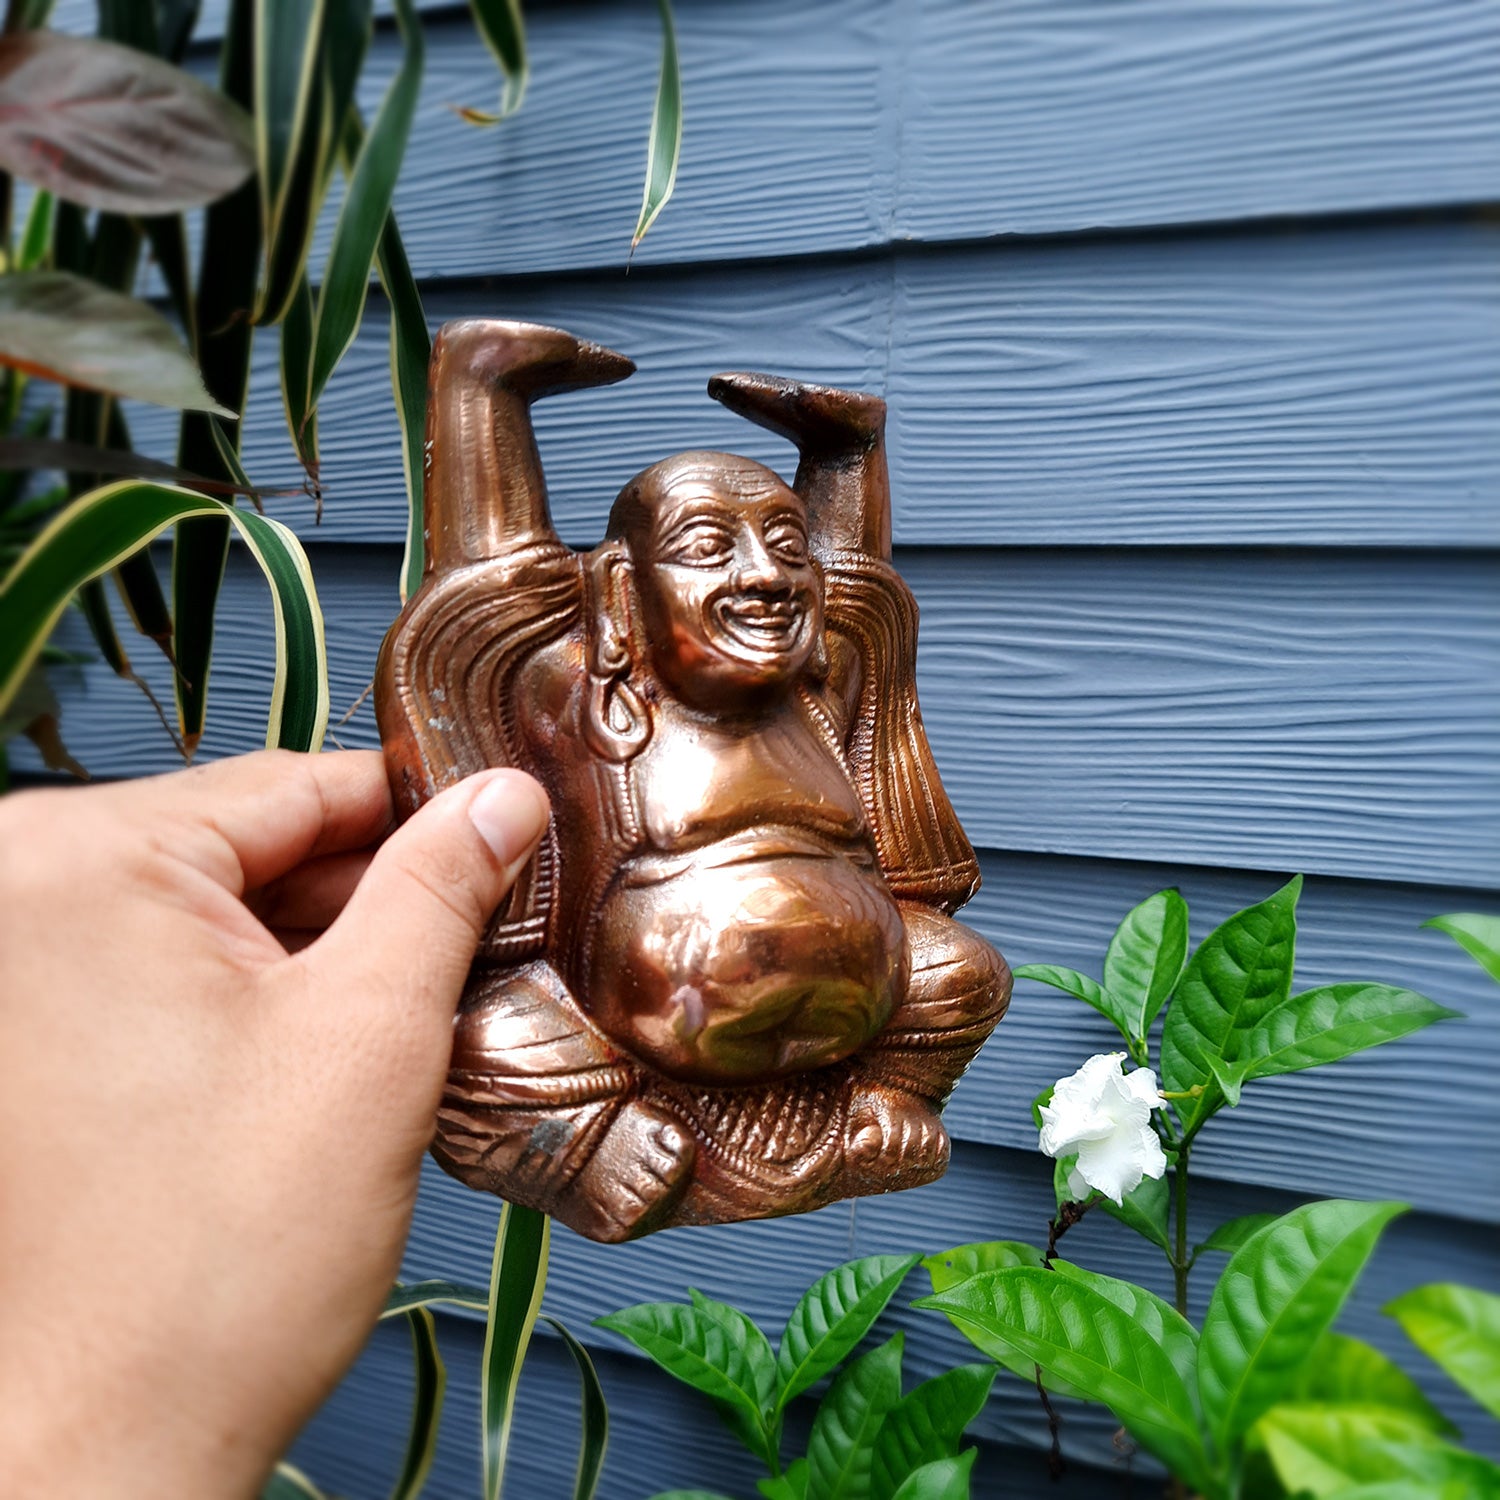 Gift Shopee - Radium laughing Buddha Brings prosperity and joy To Buy DM Us  😇 Cash On DeliveryAvailable In Selected Areas 💸 Best Quality You Will  Surely Like ✔️  #budha#laughingbudha#prosperity#showpiece#coolwink#love#spreadlove#joy#happiness#ily  ...